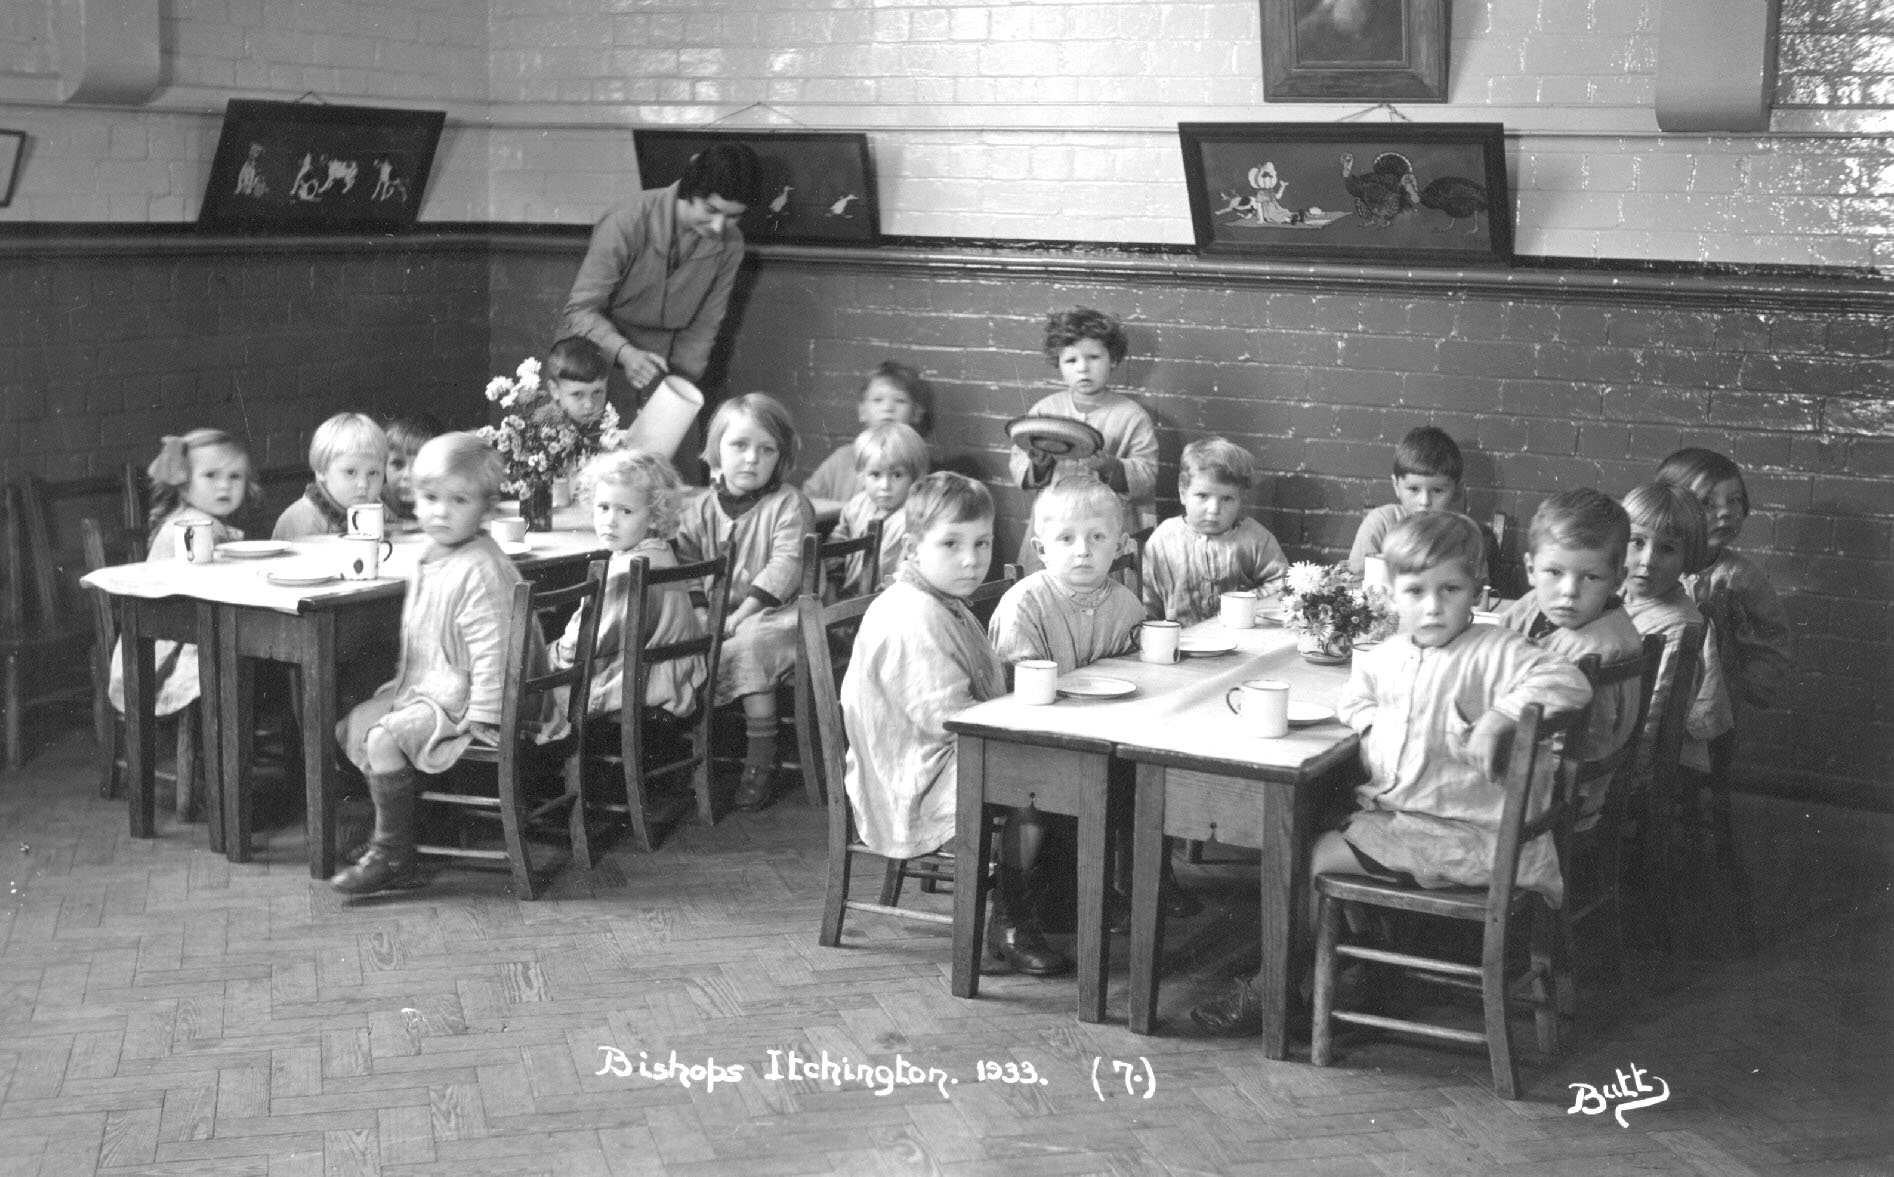 Black and white image of children sat at tables, all looking at the camera. Taken 1933